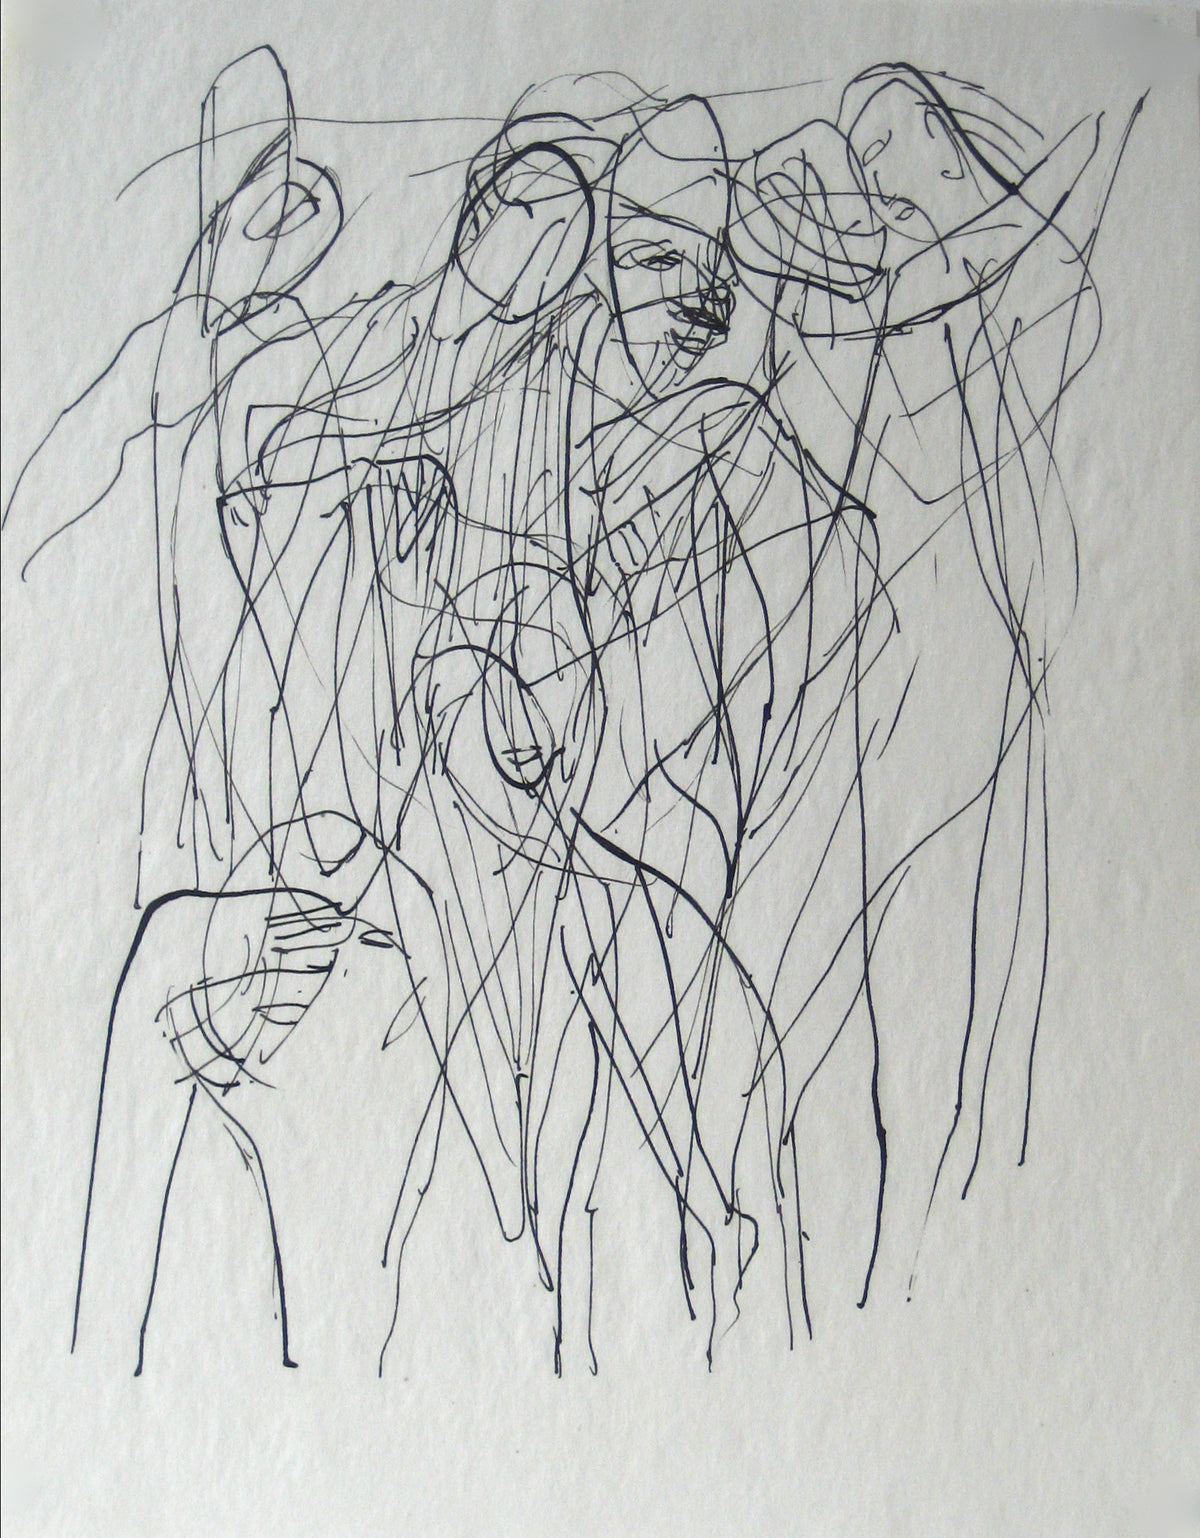 Abstracted Figures in a Scene &lt;br&gt;Early 20th Century Ink on Paper &lt;br&gt;&lt;br&gt;#13604